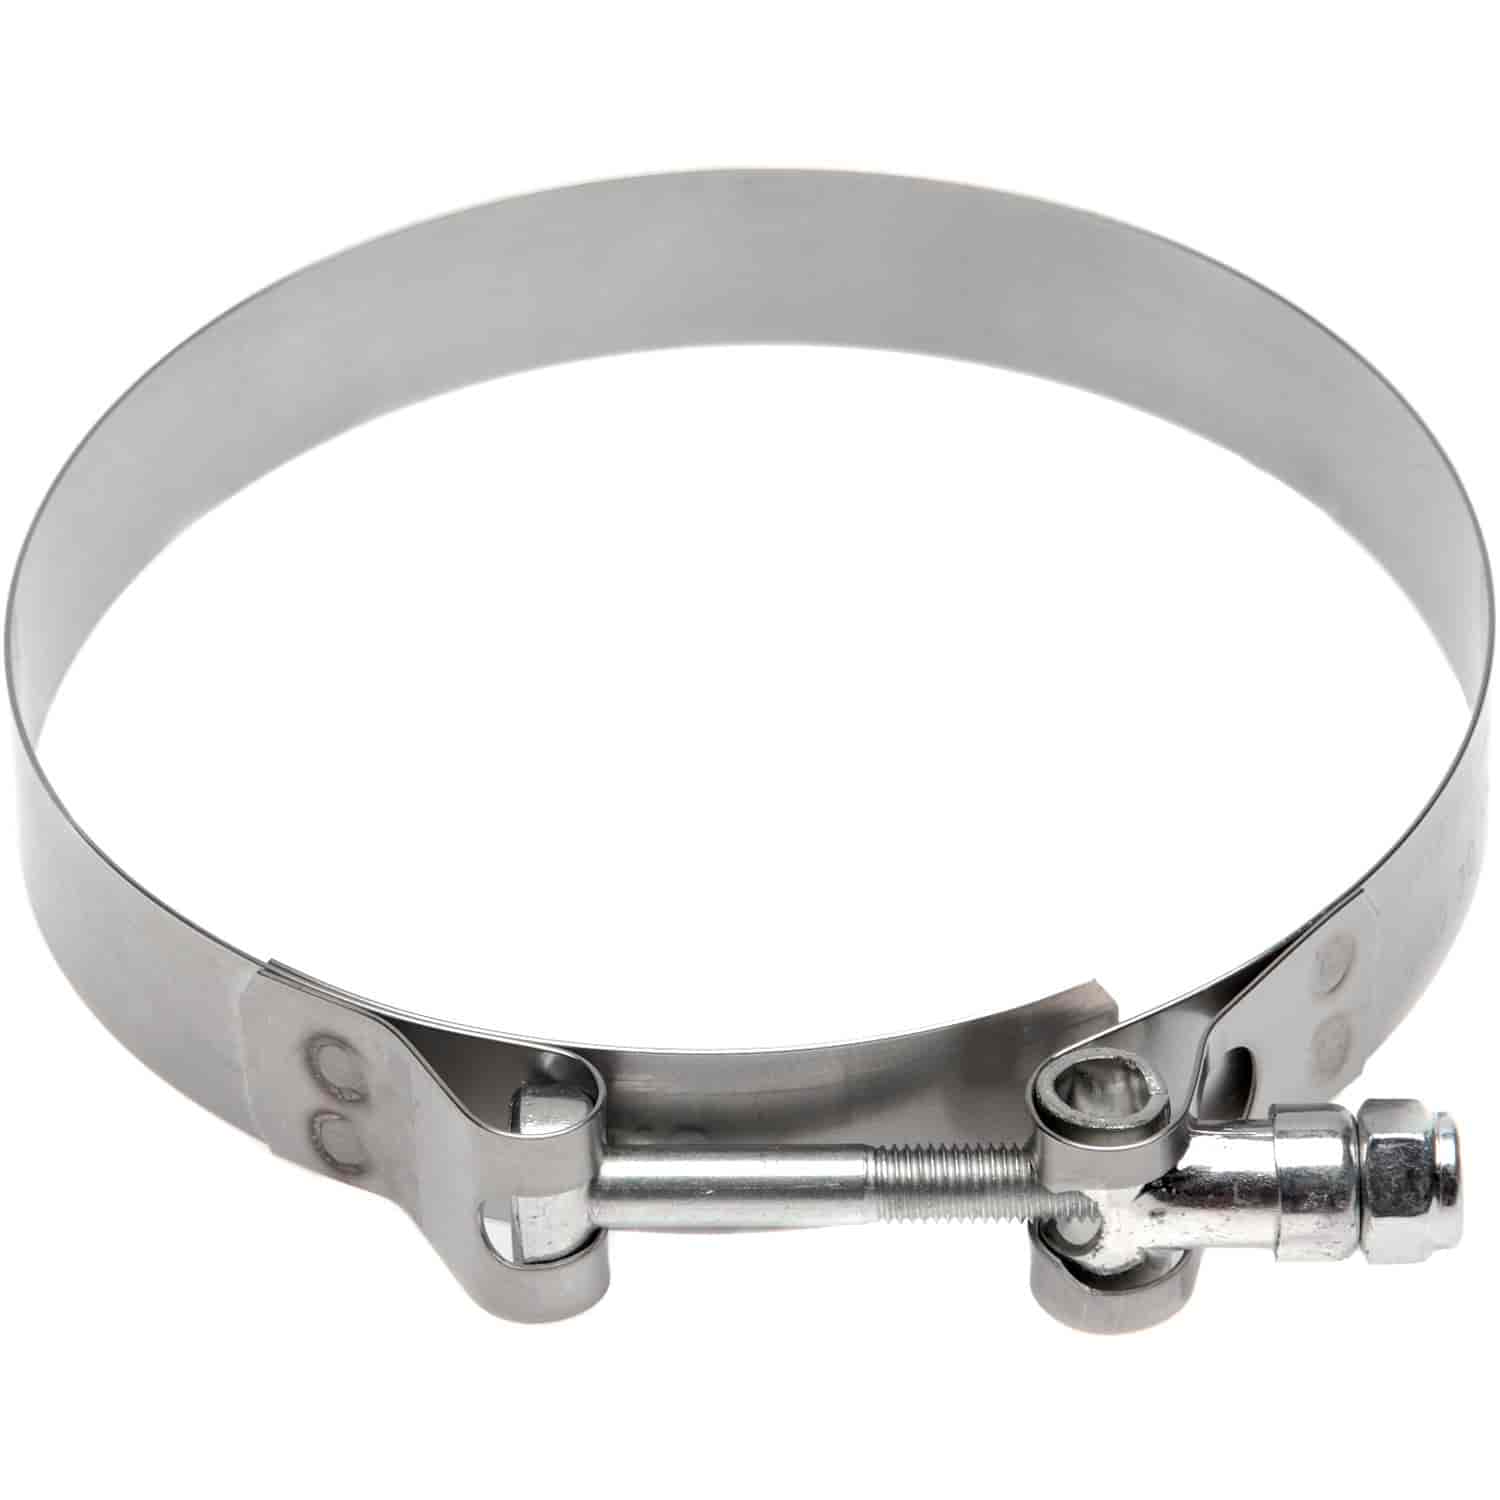 T-Bolt Hose Clamp [5.523 in. to 5.250 in. Outside Diameter]